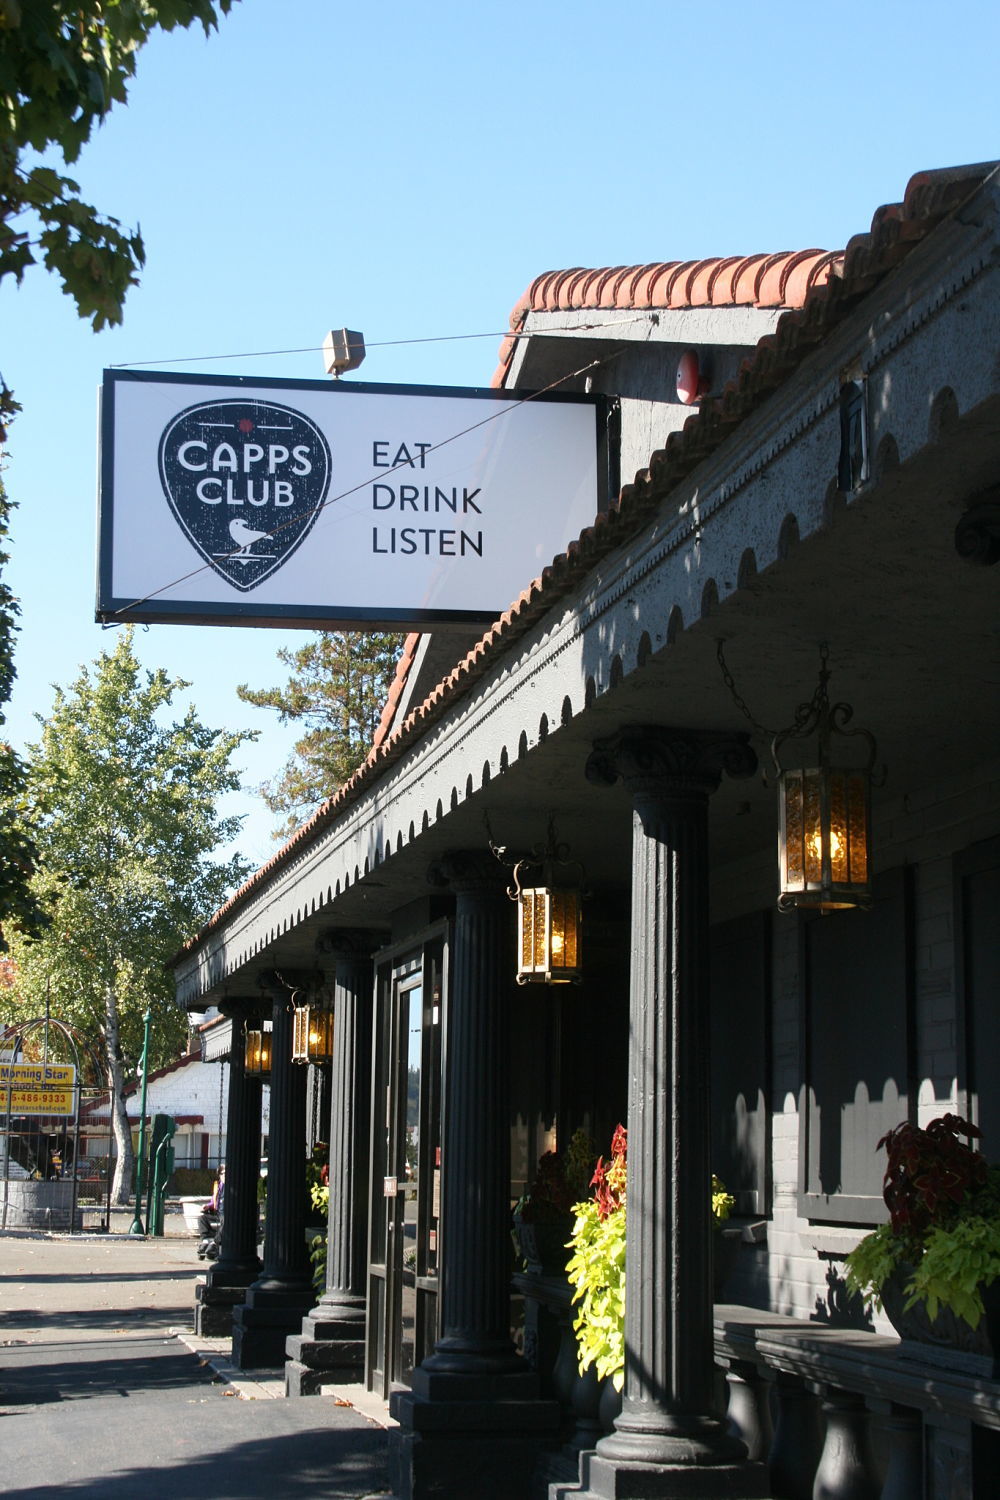 Capps Club in Kenmore regroups to put music first